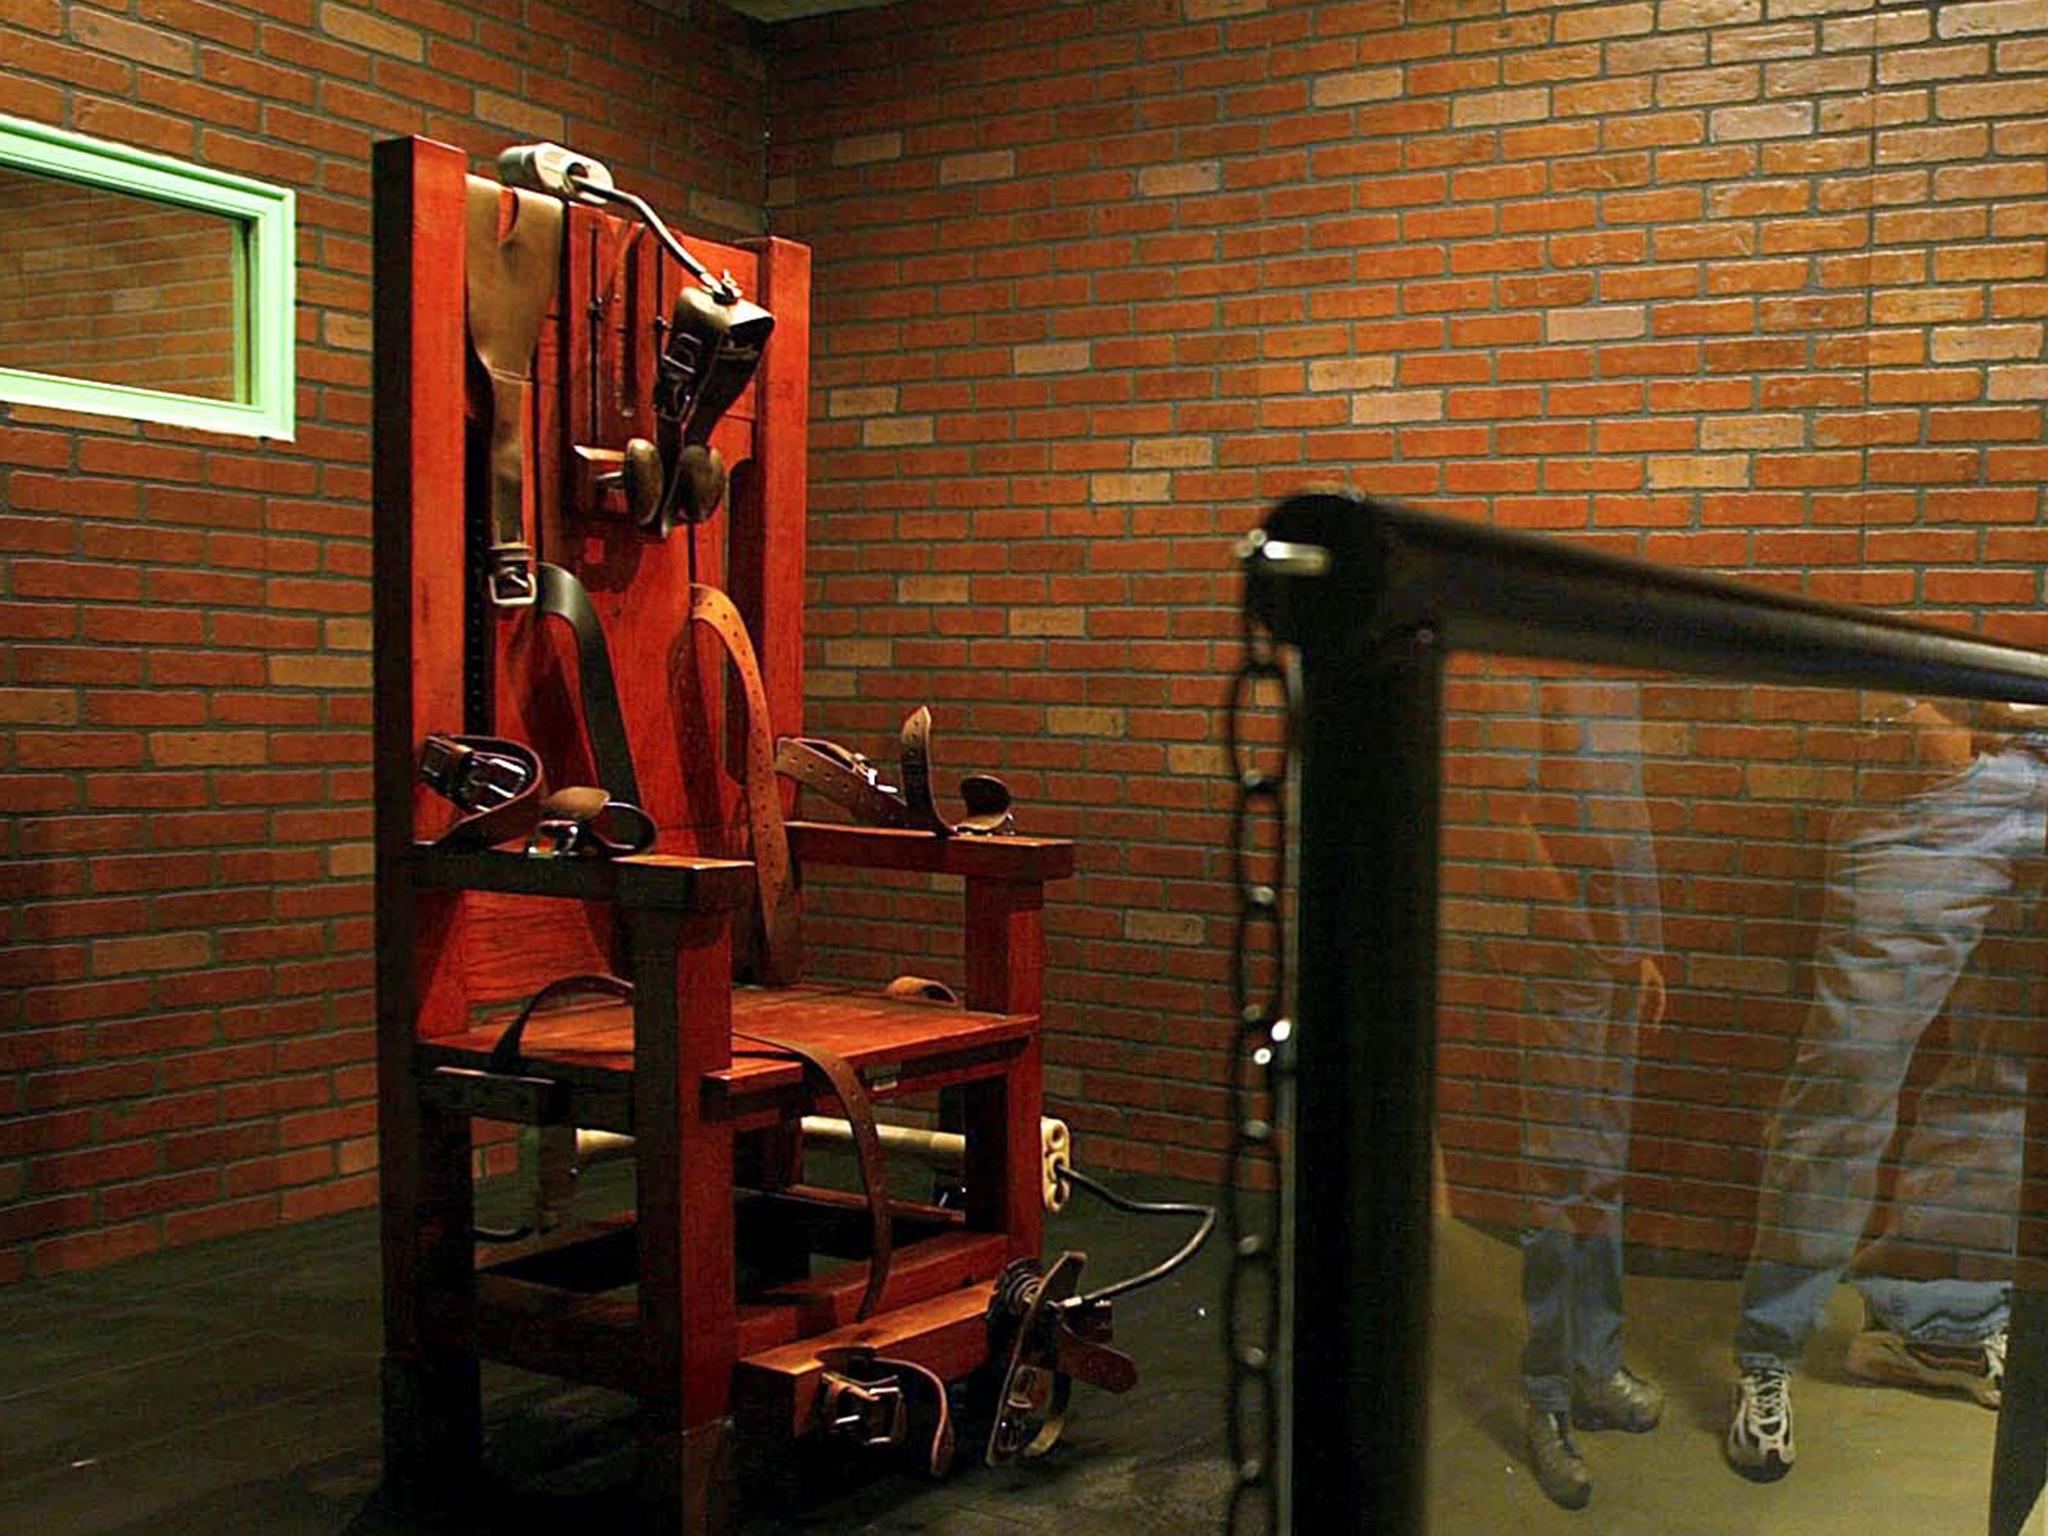 ‘Old Sparky’, the electric chair where 361 people were executed over 40 years, is still fully functional and is tested regularly